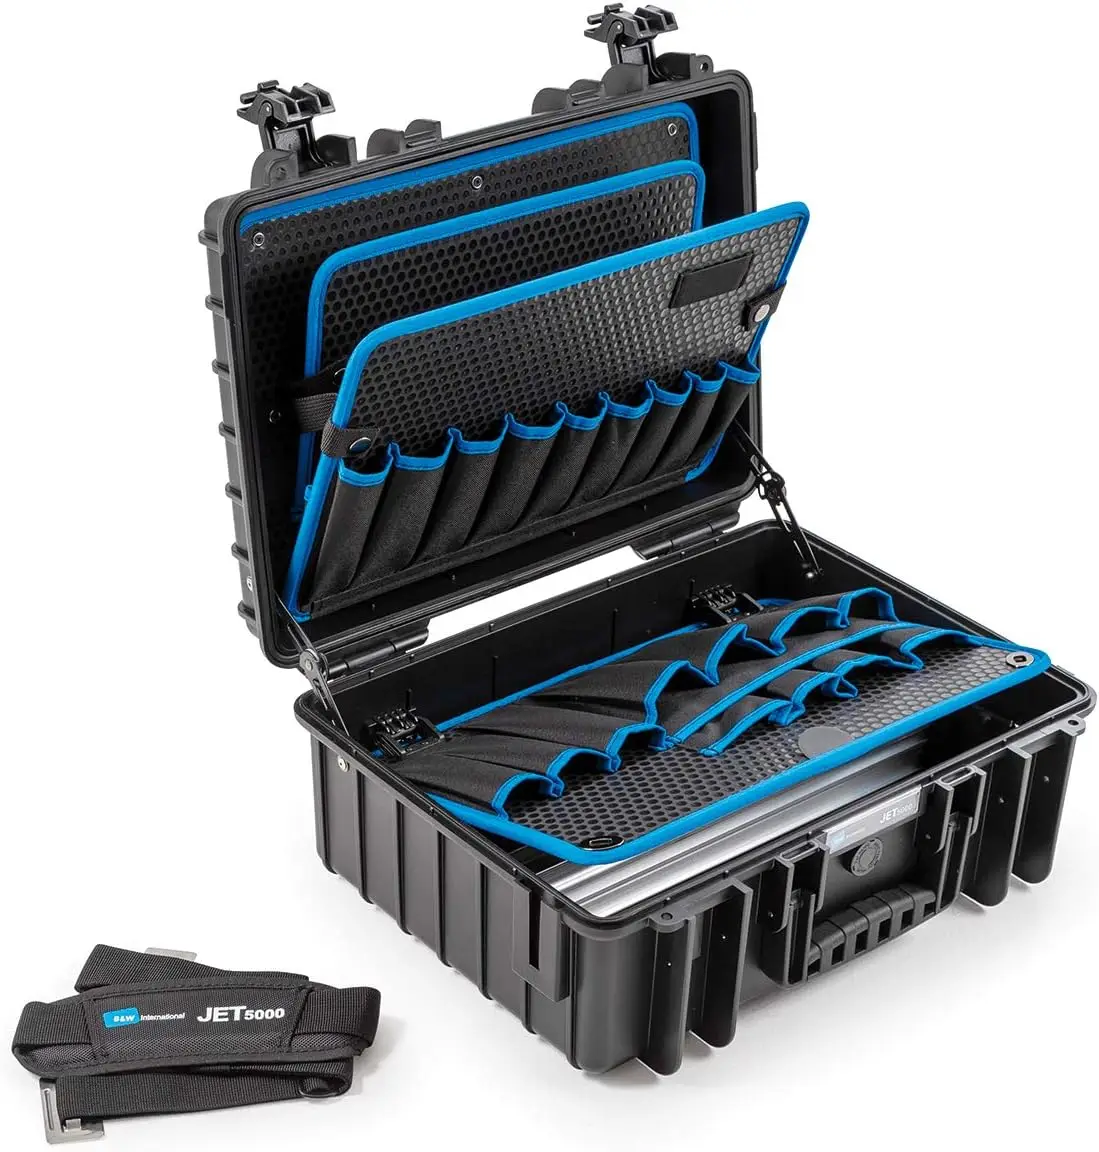 

Jet 5000 Outdoor Tool Case with Pocket Tool Boards